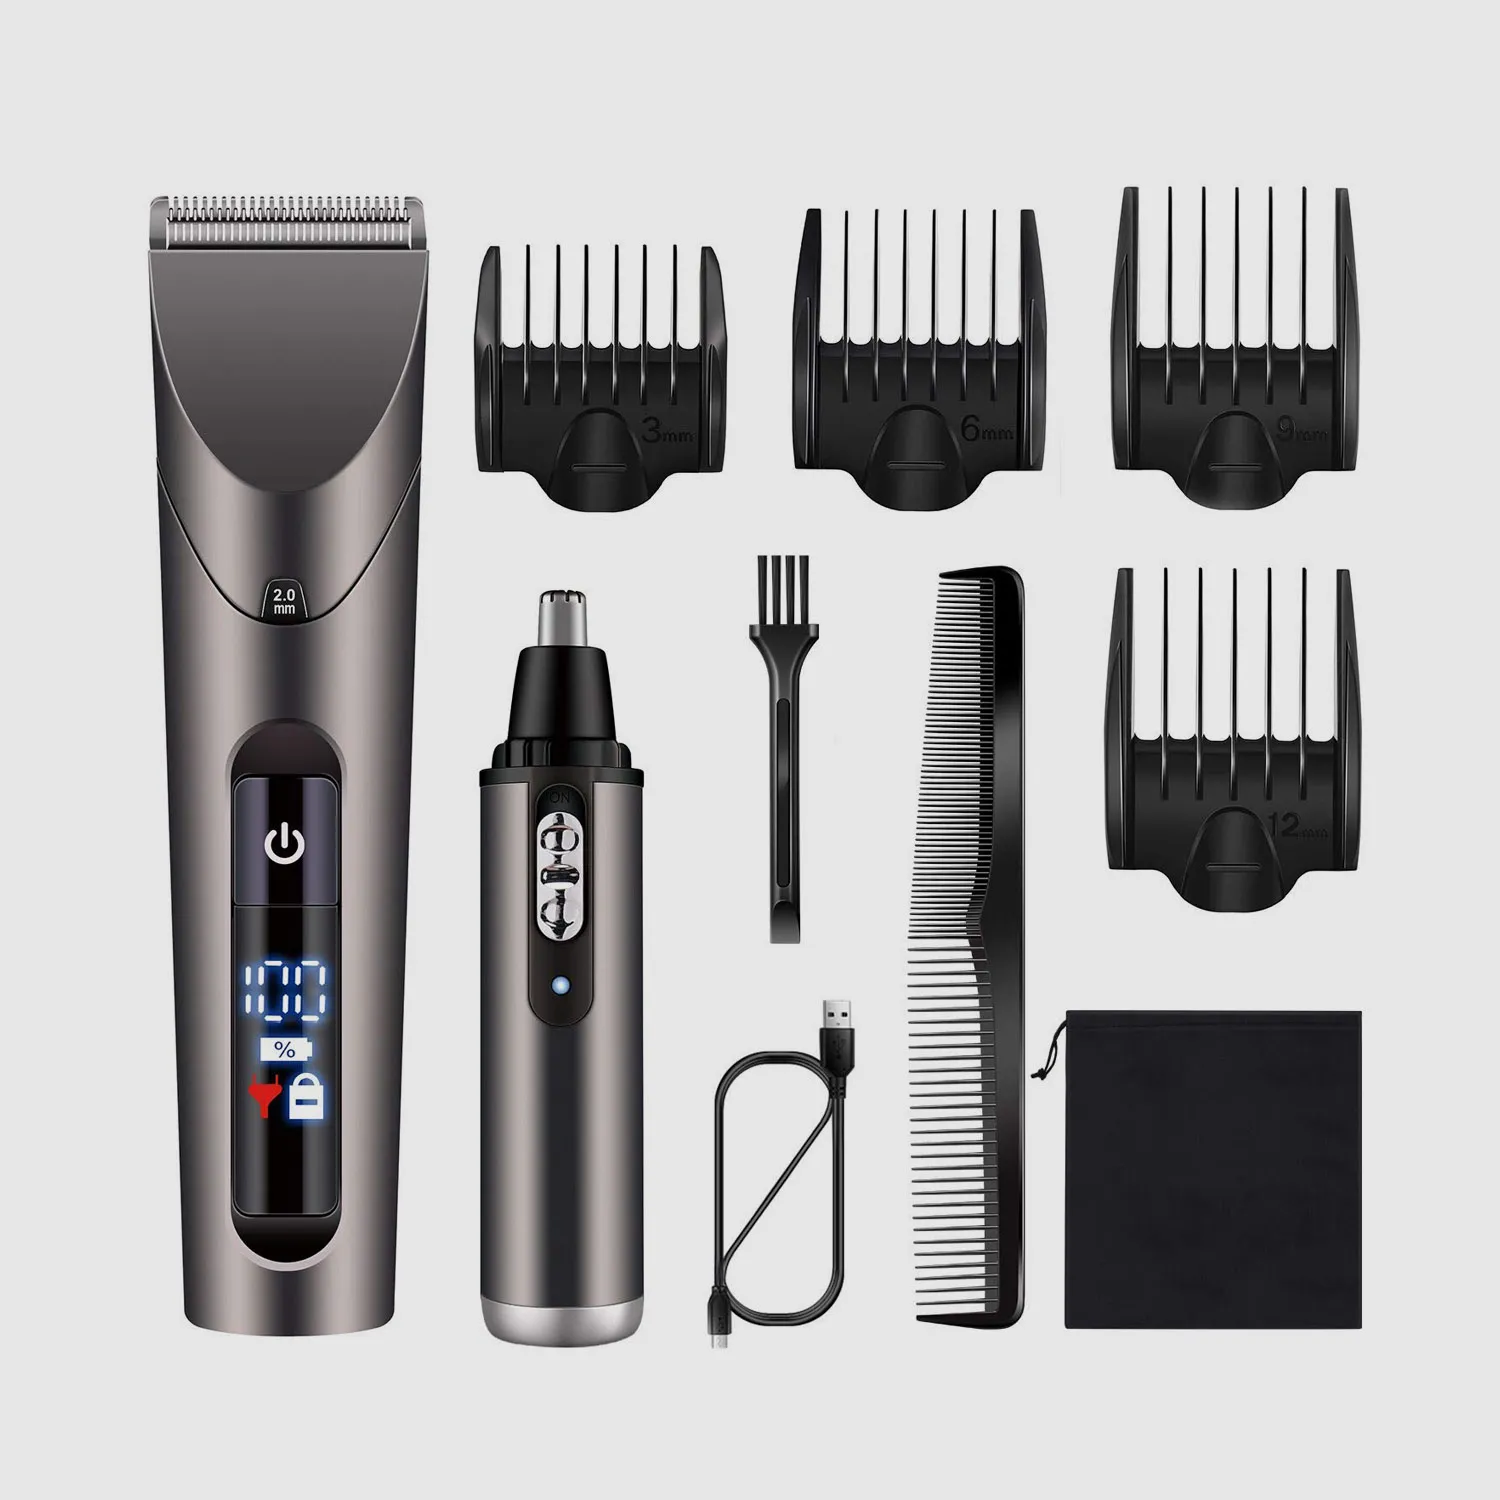 What content does the LED Display Hair Clipper generally display and what are the benefits?